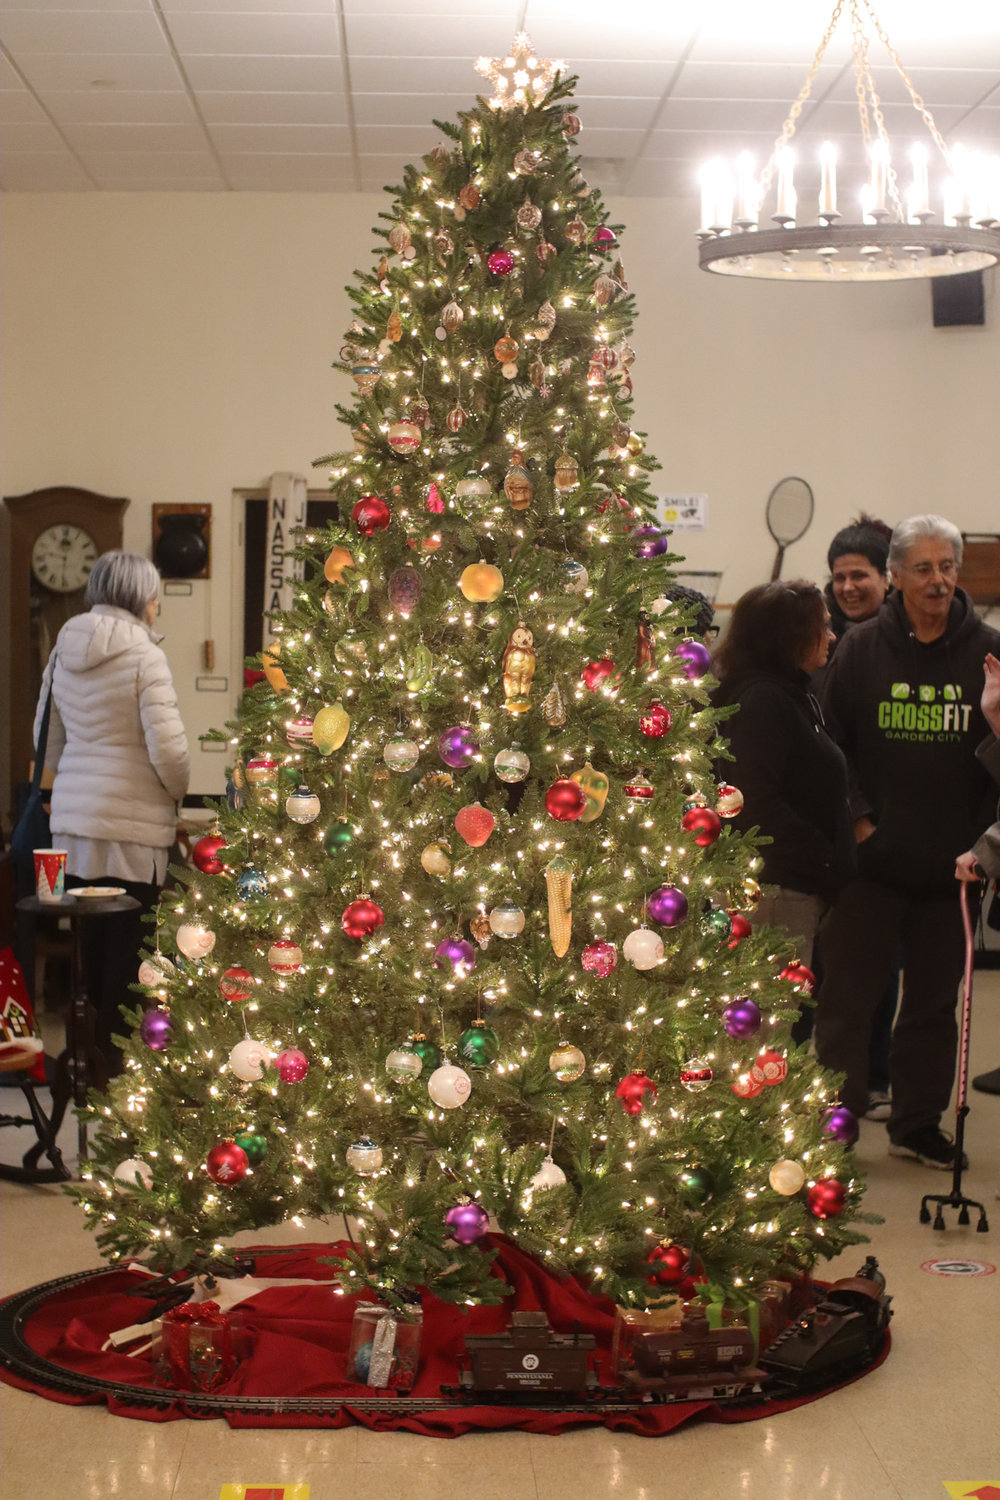 The nine-foot-tall Christmas tree adorned in handblown German ornaments was the main attraction of the open house event.